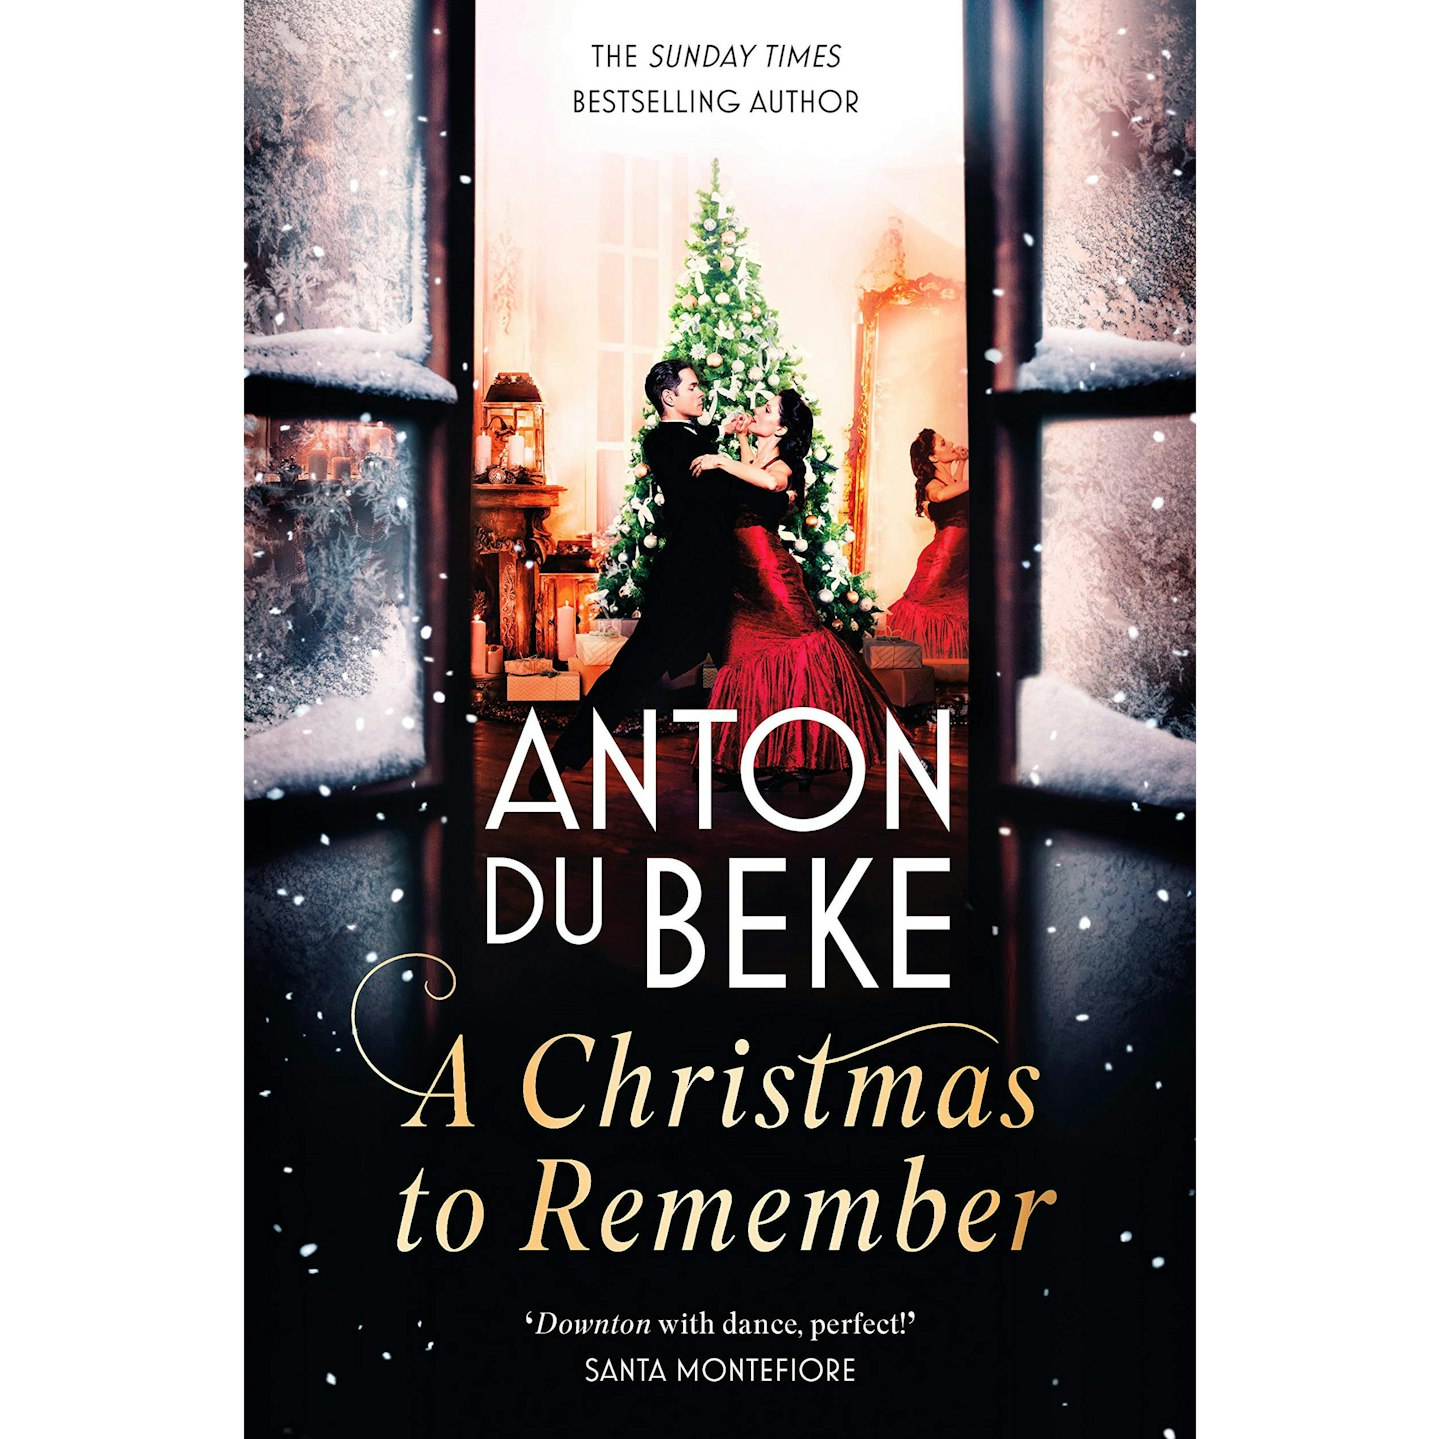 A Christmas to Remember by Anton du Beke